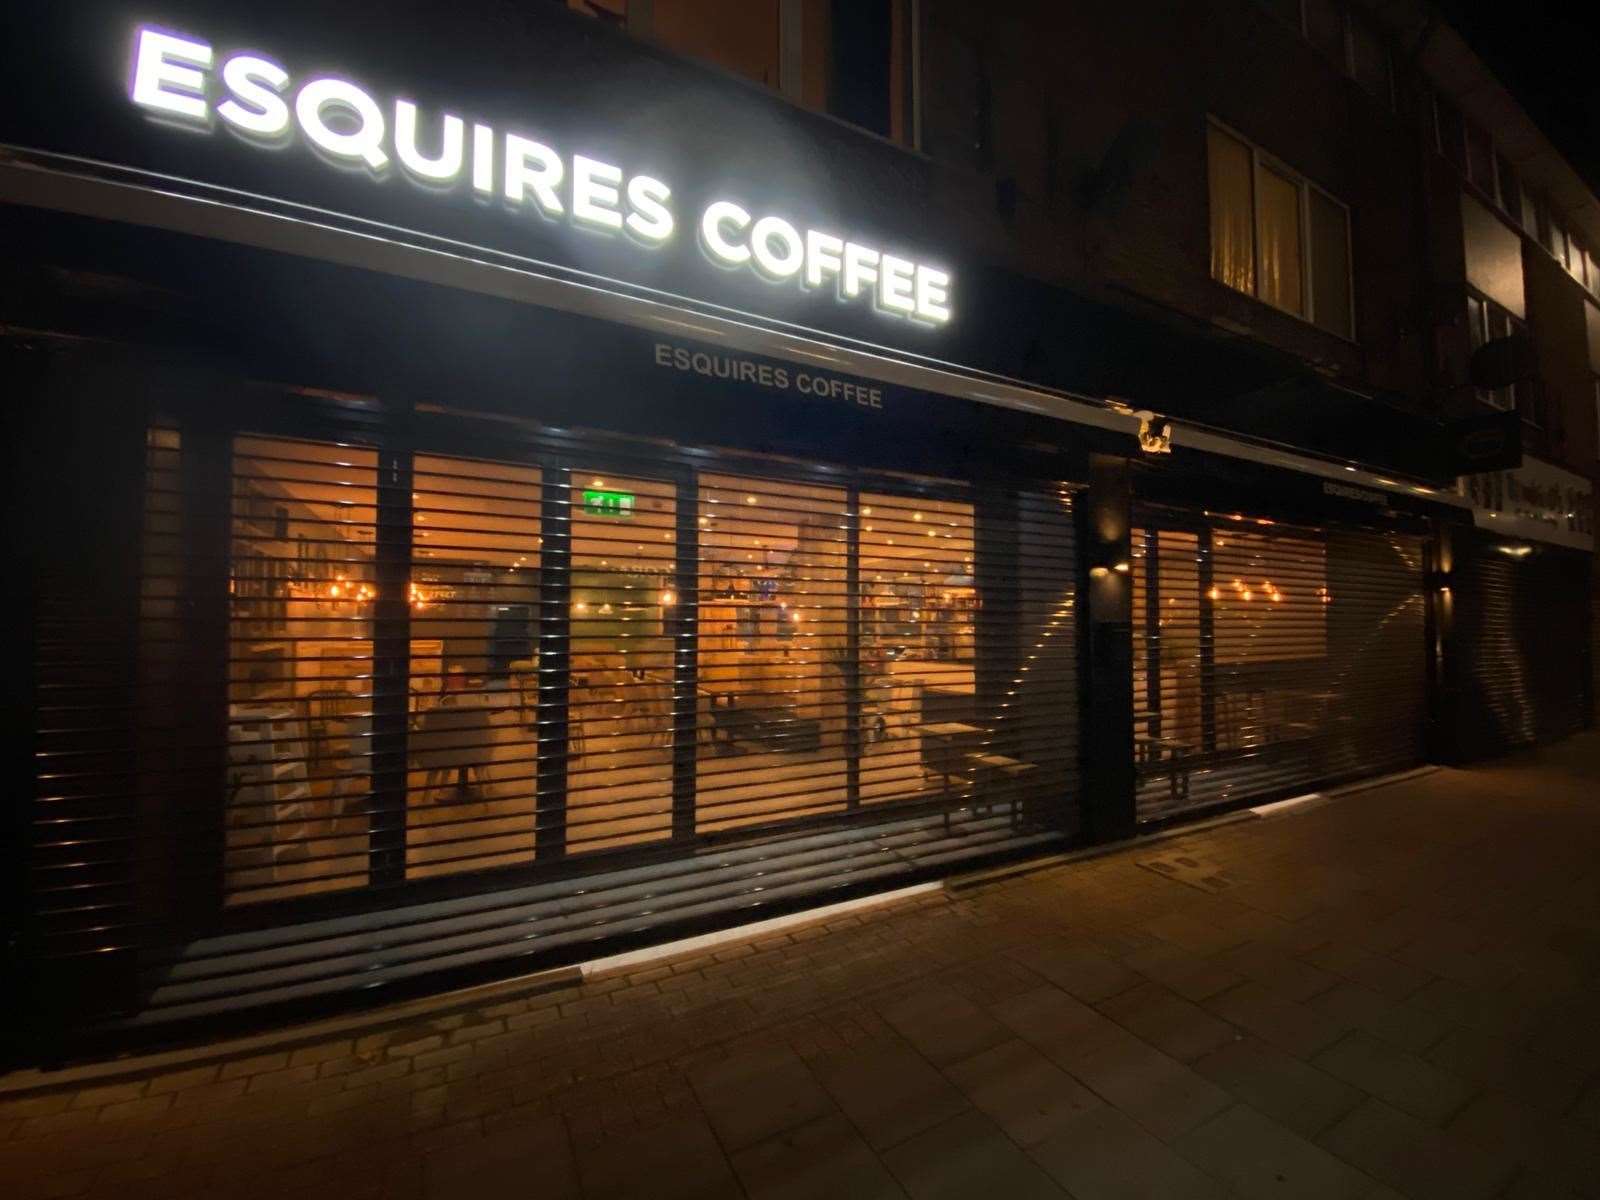 Esquires Coffee will be forced to close its Crayford branch just three months after opening.